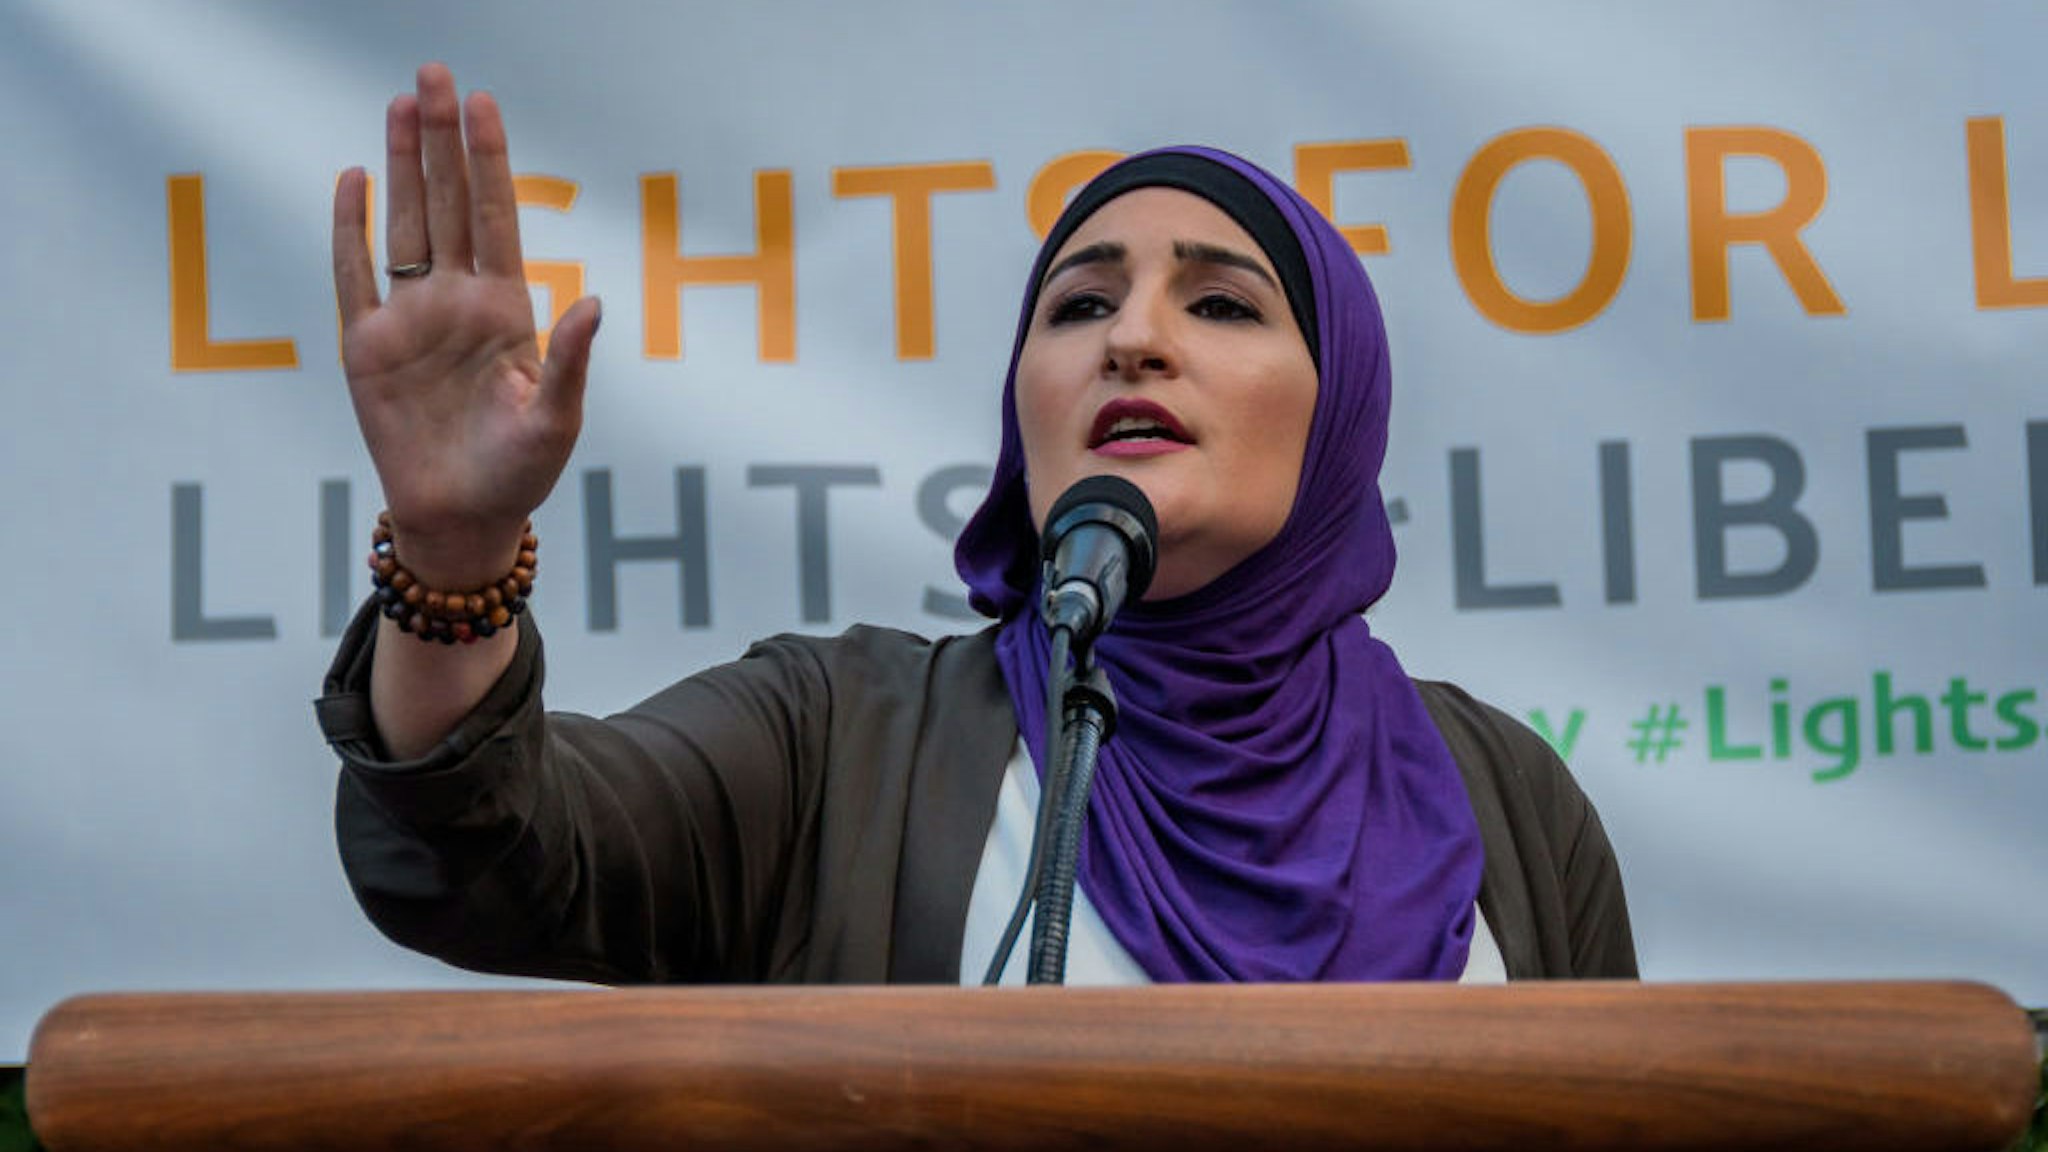 FOLEY SQUARE, NEW YORK, UNITED STATES - 2019/07/12: Activist Linda Sarsour - Thousands of advocates, activists and community members flooded the streets at Foley Square, across from the Immigration and Customs Enforcement (ICE) New York Field Office to join New Sanctuary Coalition and The New York Immigration Coalition at the Lights for Liberty vigil, deemed one of the largest solidarity actions in history with over 750 vigils across 5 continents. A light was lit for all those held in U.S. detention camps and to bring light to the darkness of the Trump administration’s horrific policies. (Photo by Erik McGregor/LightRocket via Getty Images)